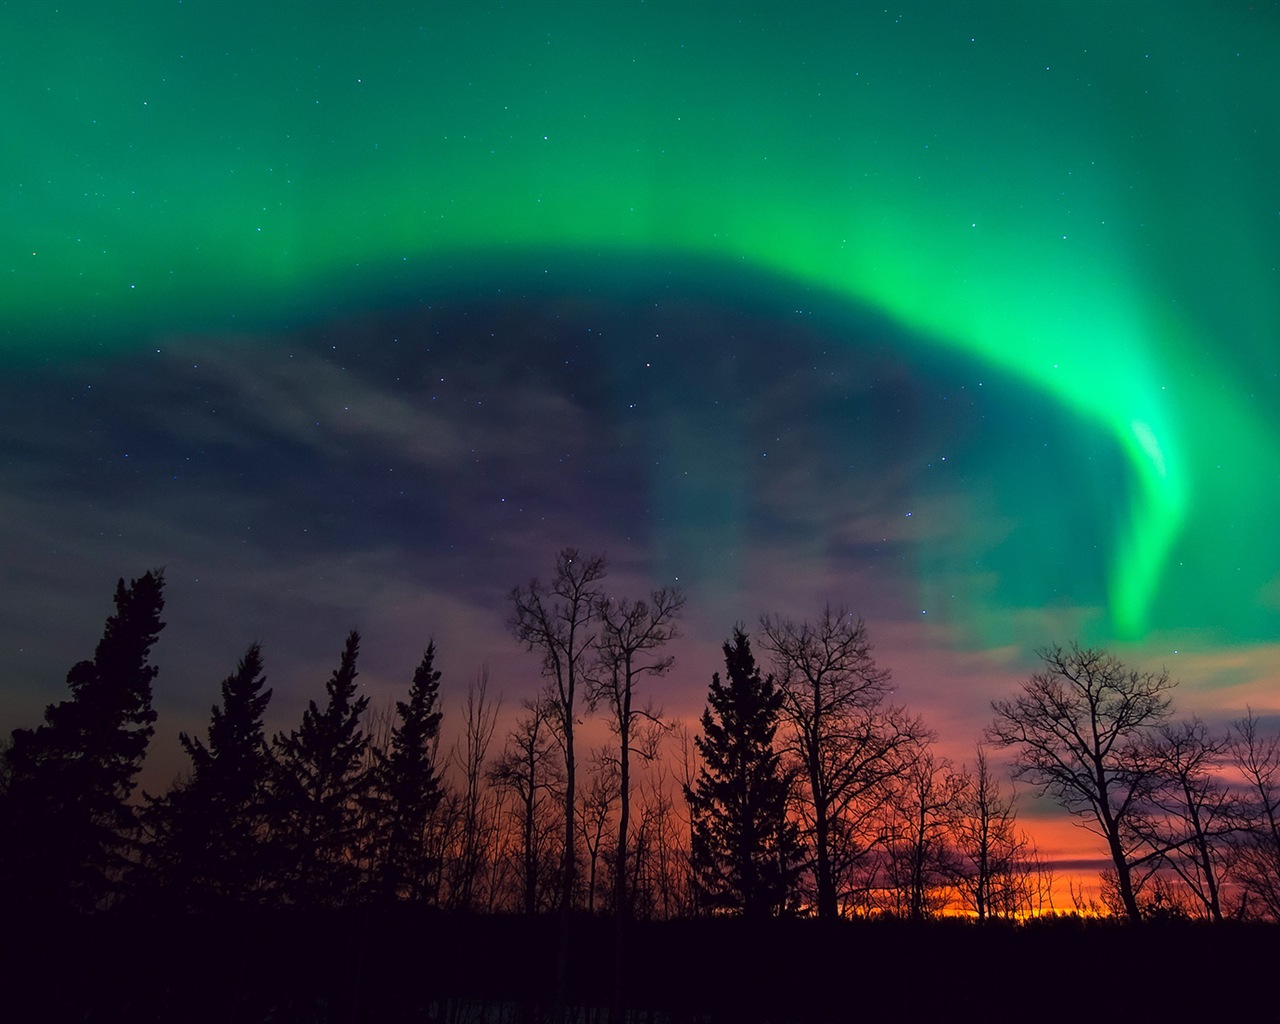 Natural wonders of the Northern Lights HD Wallpaper (1) #19 - 1280x1024